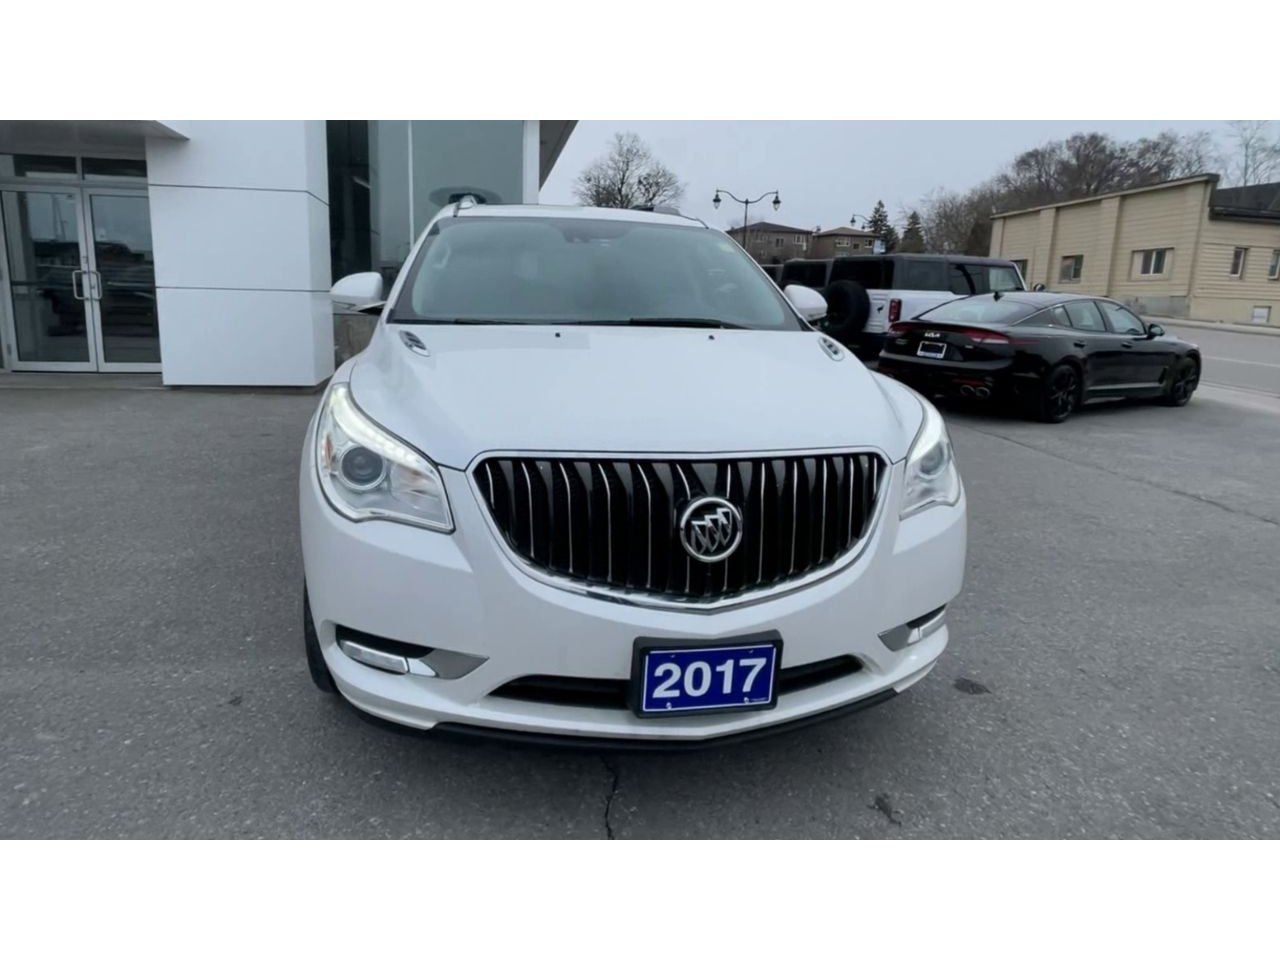 2017 Buick Enclave - P21810 Full Image 3